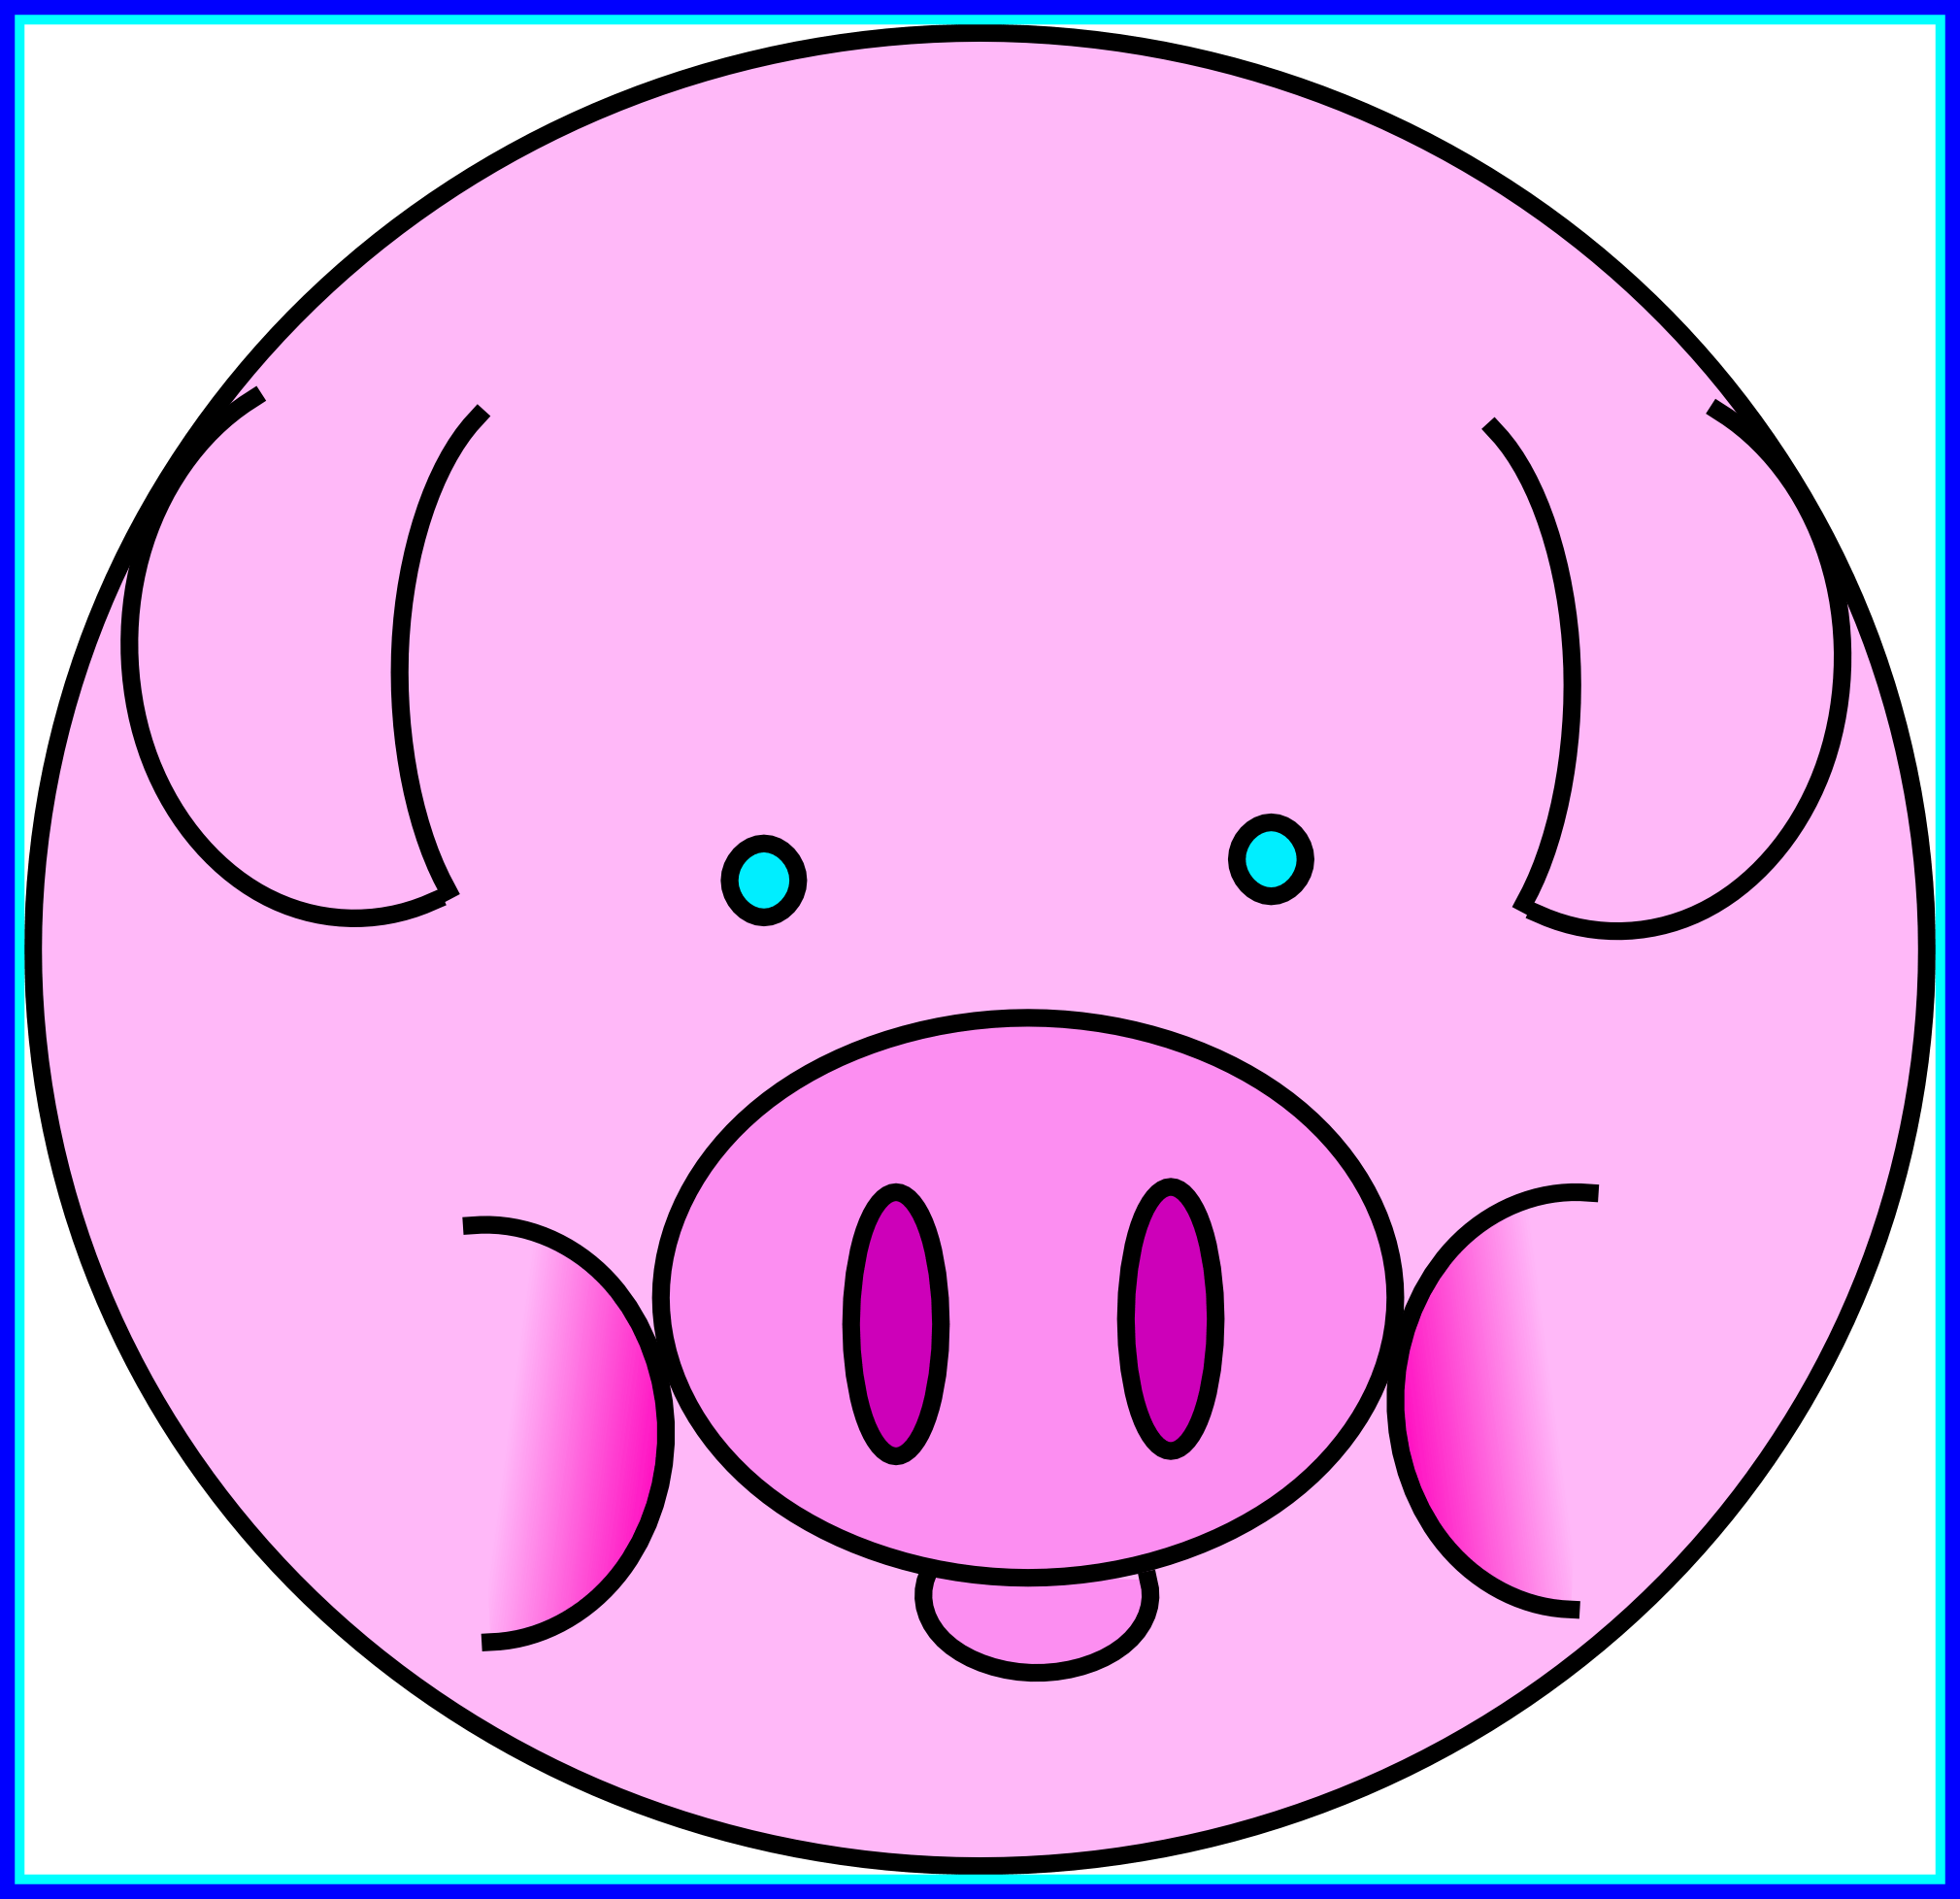 pigs clipart vector